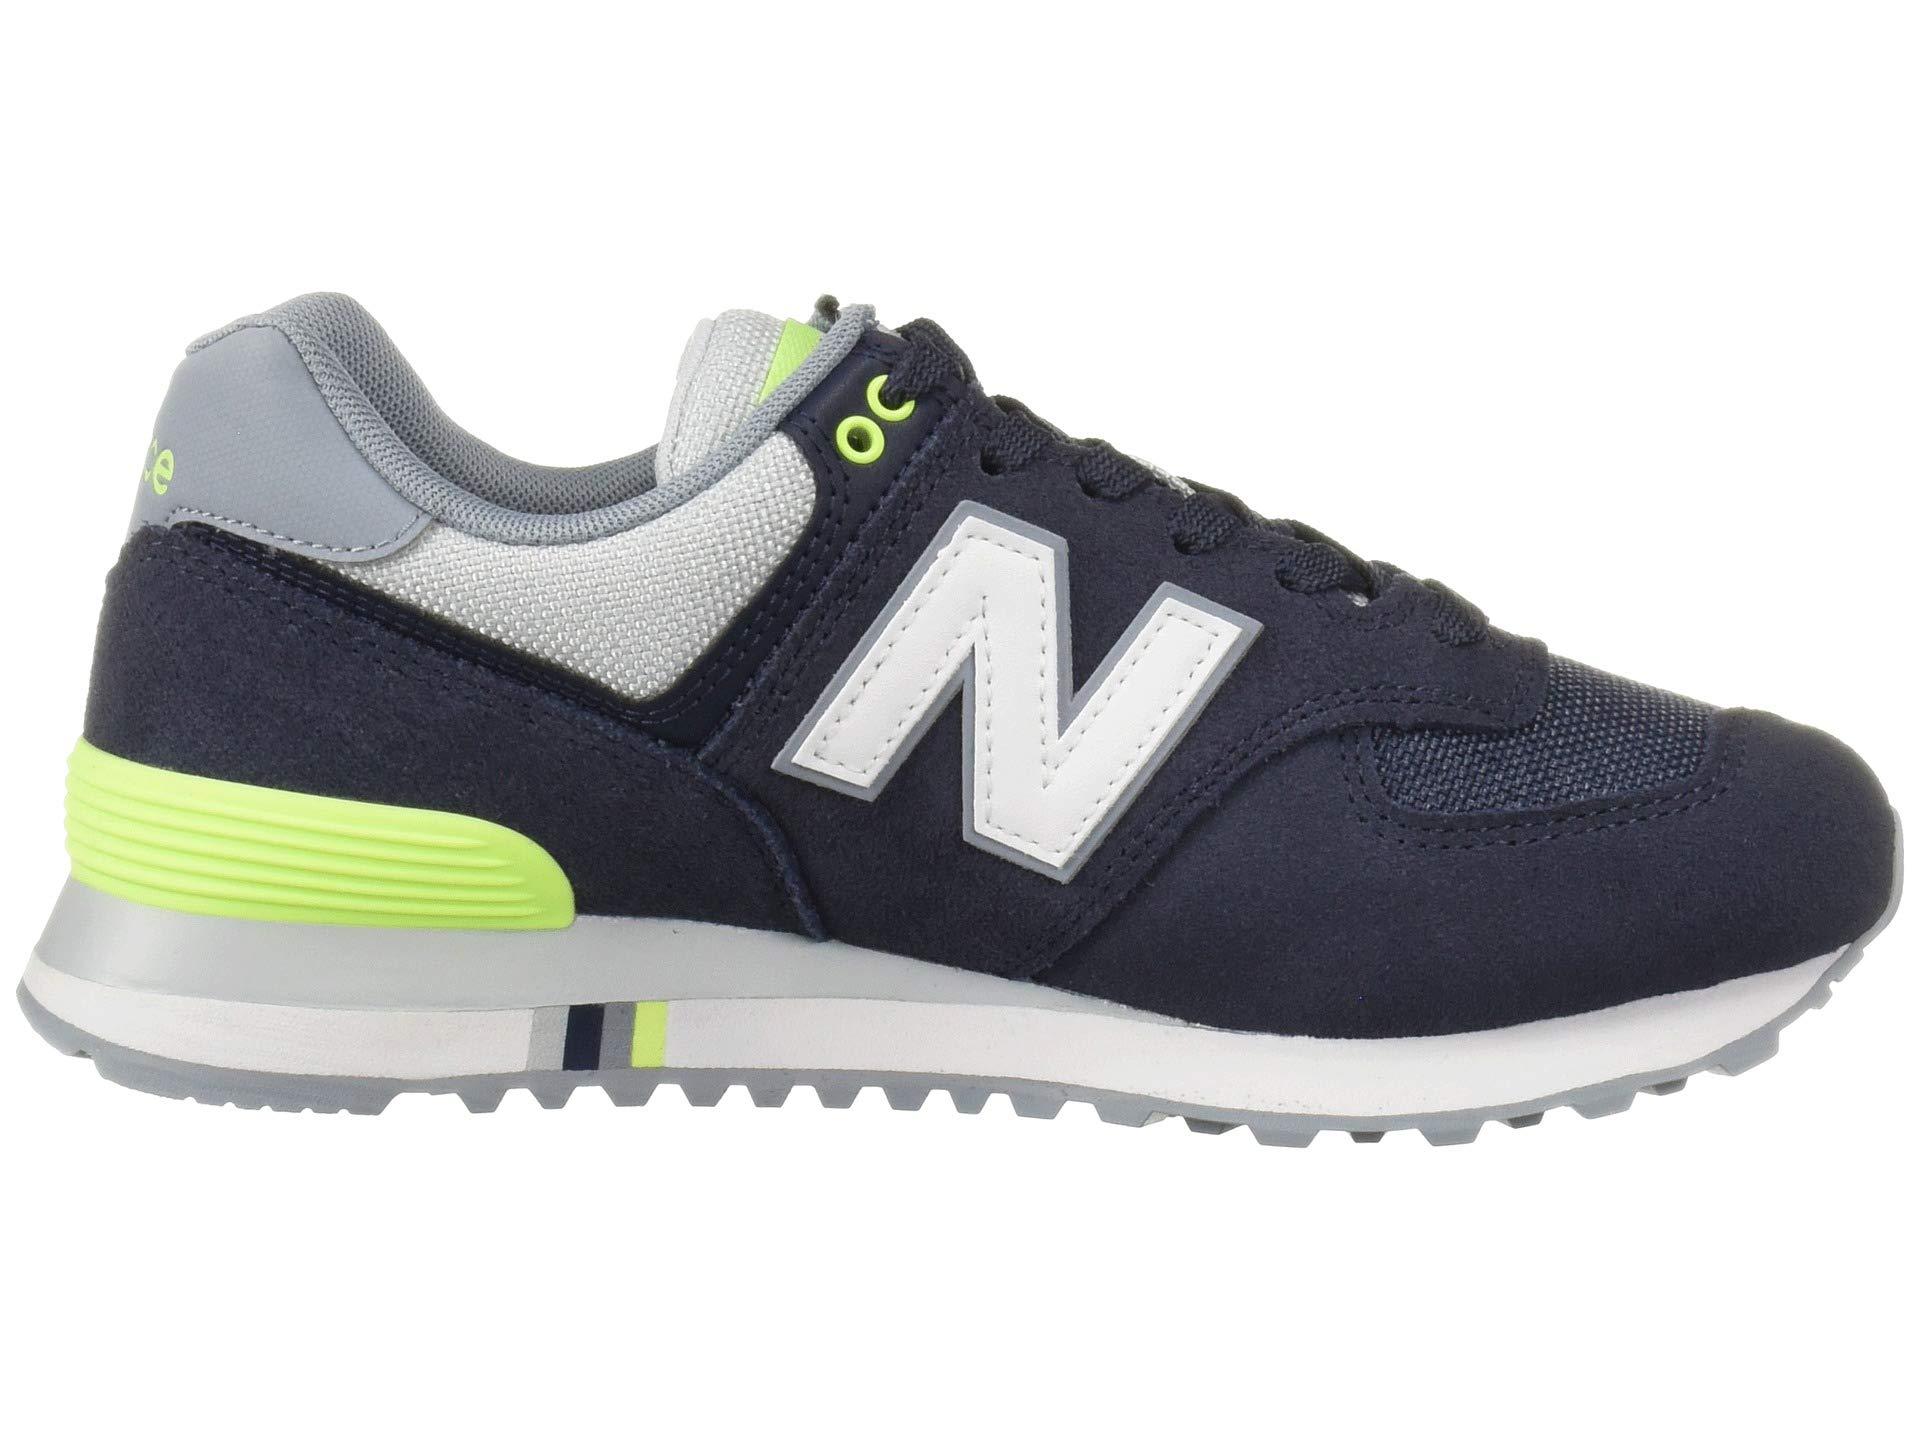 New Balance Suede 574 Summer Shore in Navy (Blue) for Men - Lyst